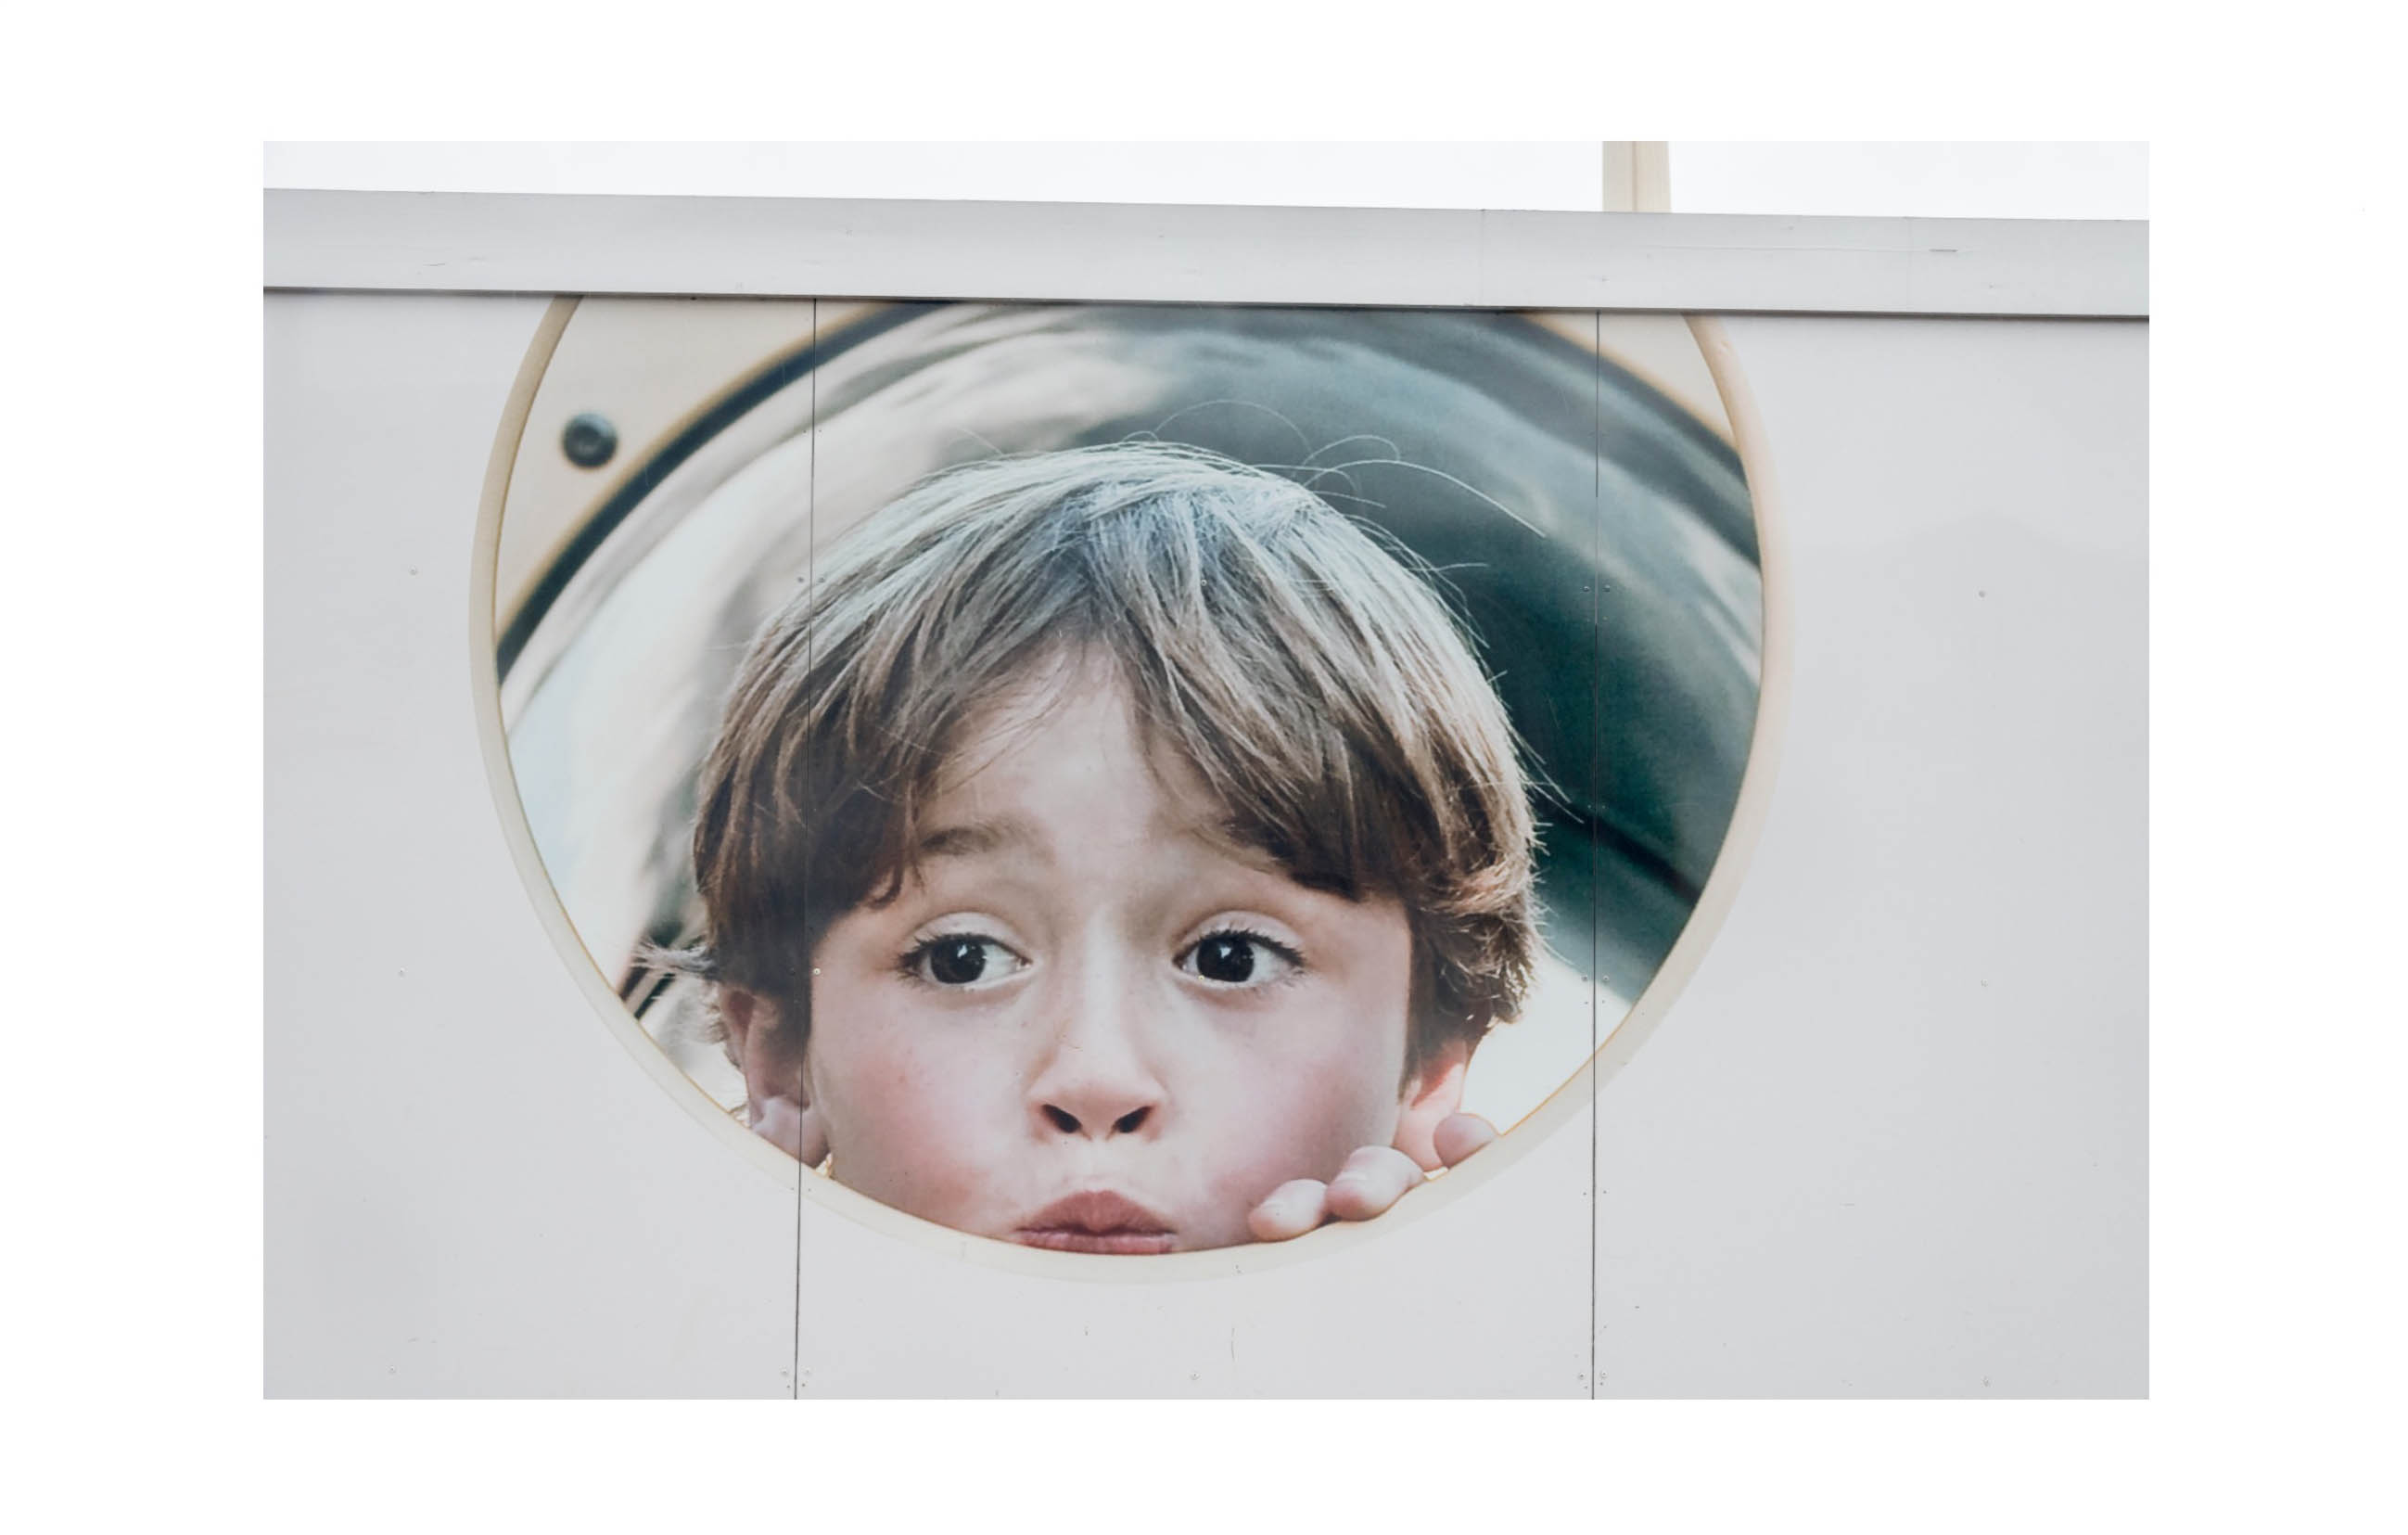 A hoarding shows a photographic image of an apparently privileged young boy peeping through a circular hole